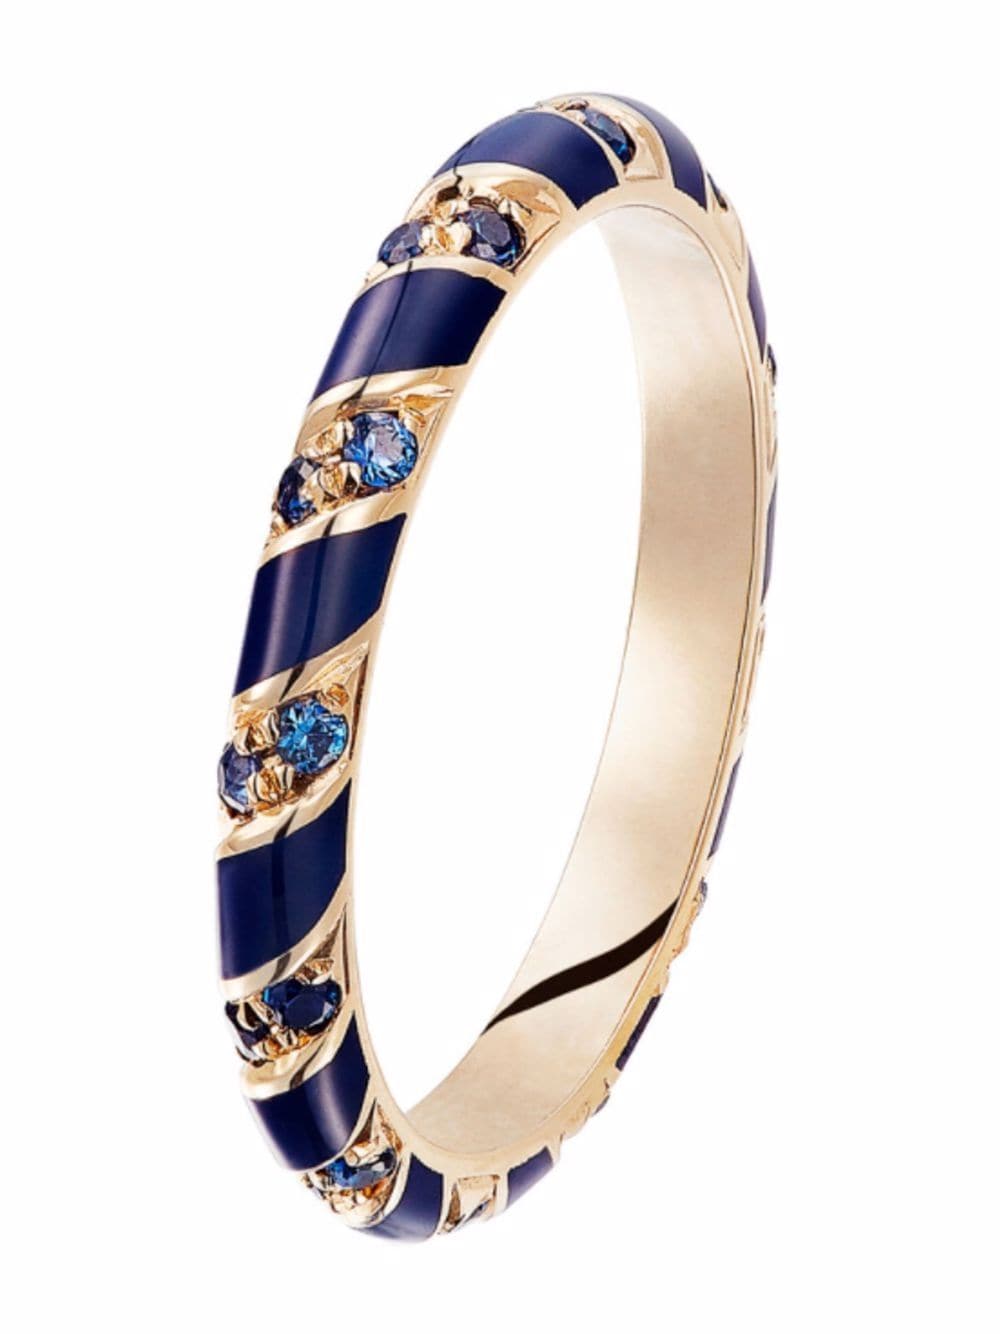 Alice Cicolini 14kt yellow gold Memphis Candy sapphire ring